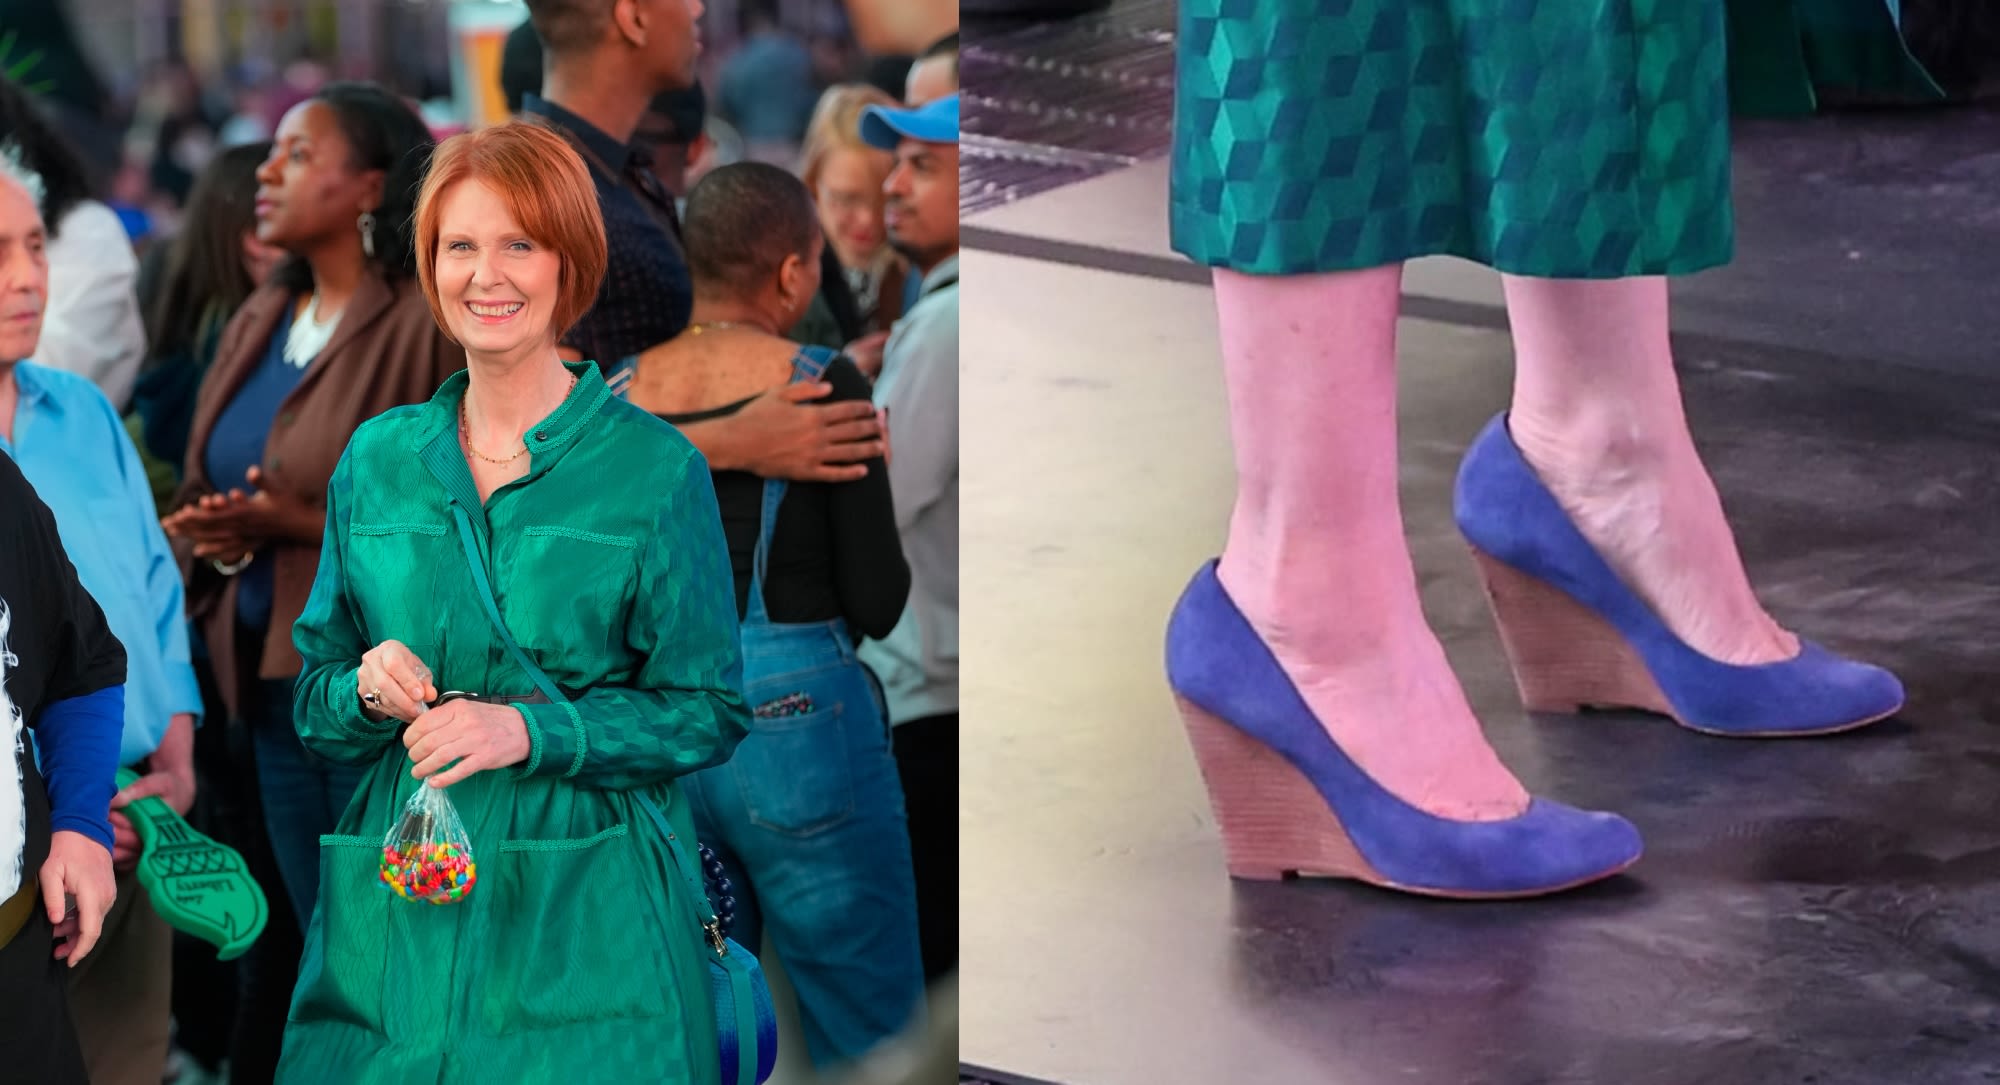 Cynthia Nixon Films ‘And Just Like That’ in Flirty Blue Suede Wedges with Rosie O’Donnell in New York